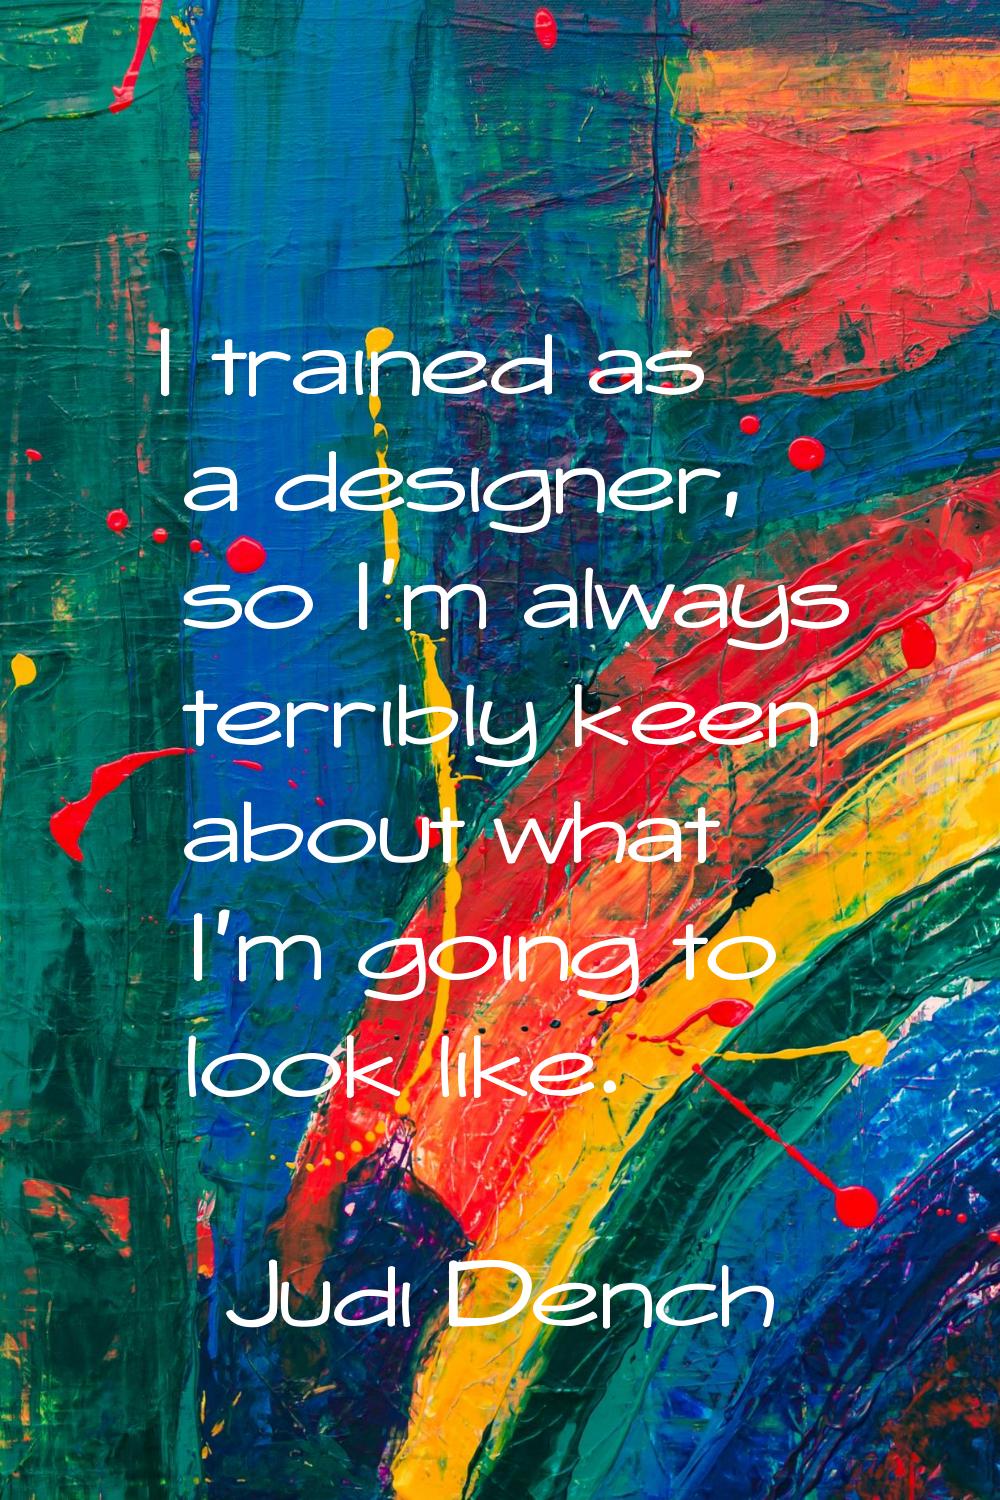 I trained as a designer, so I'm always terribly keen about what I'm going to look like.